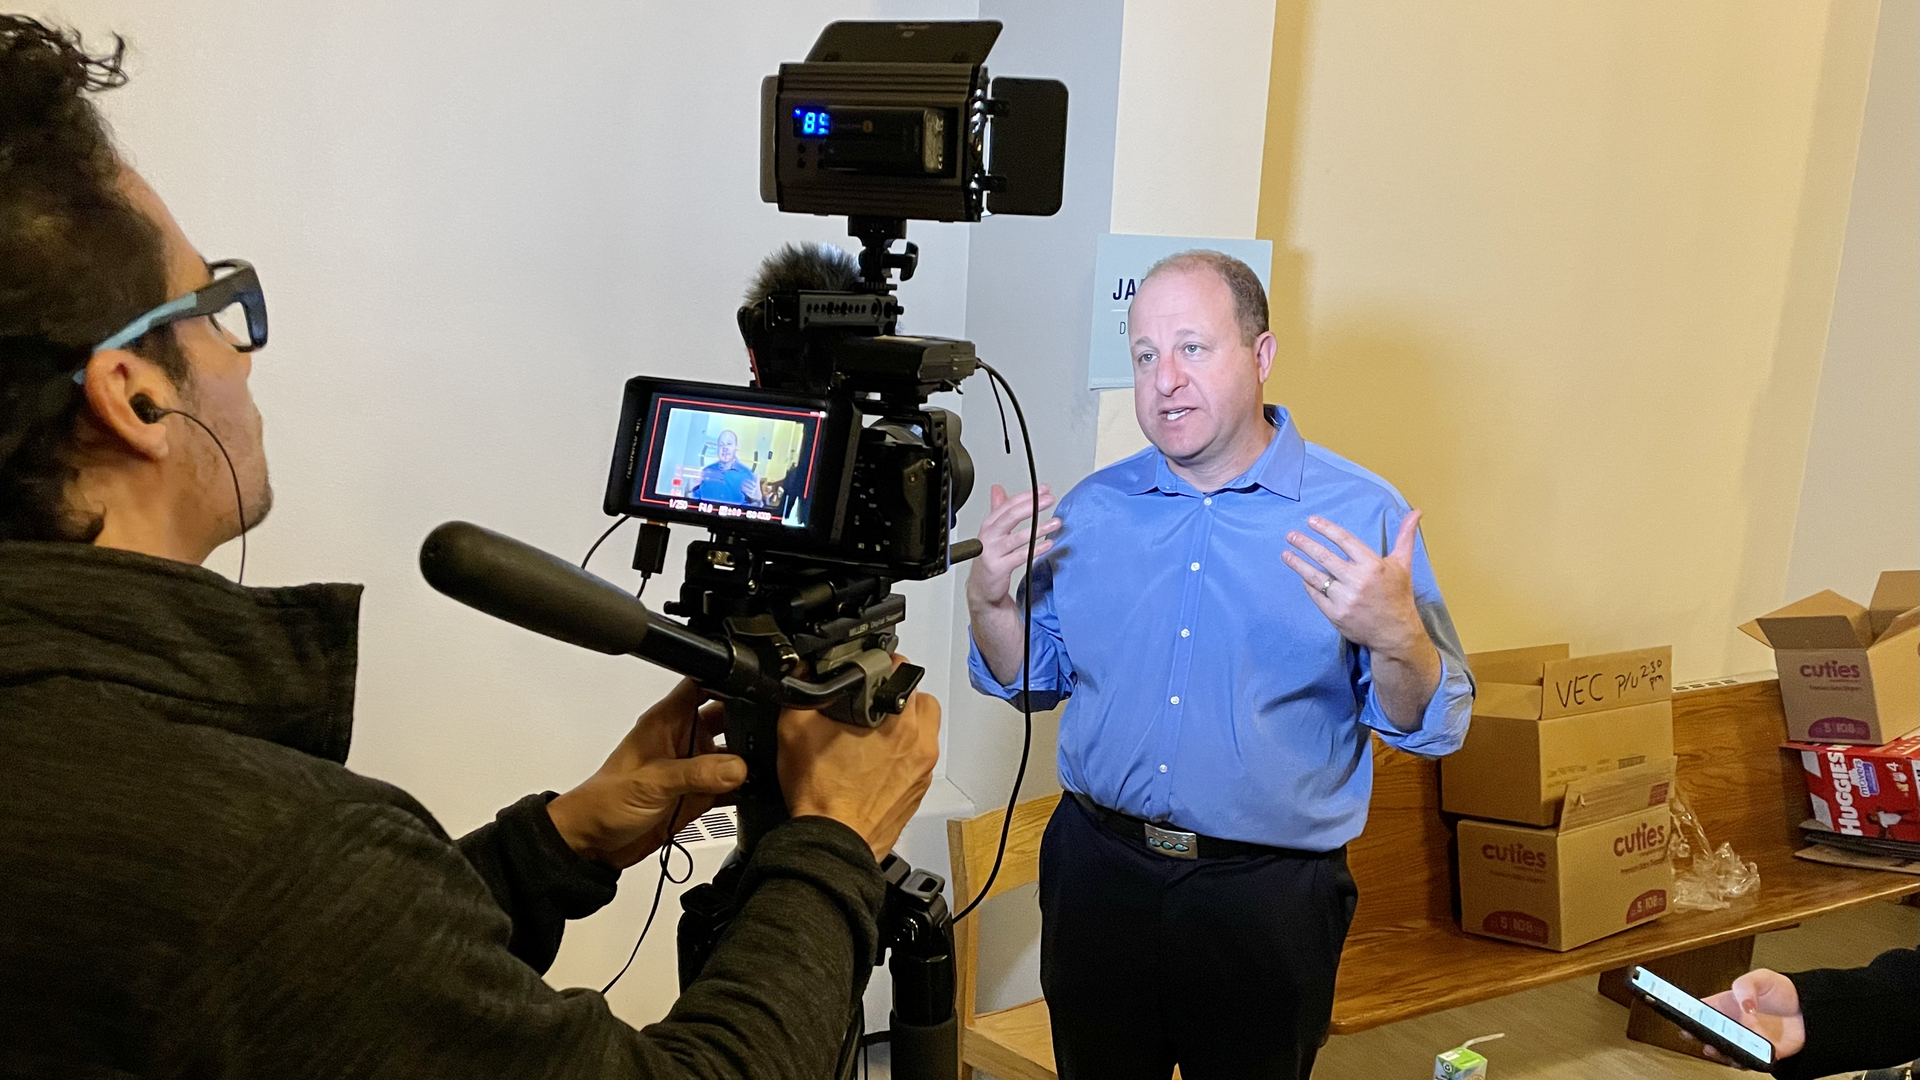 Gov. Jared Polis speaks to a Spanish-language TV station at a campaign kickoff event Wednesday in Aurora. Photo: John Frank/Axios